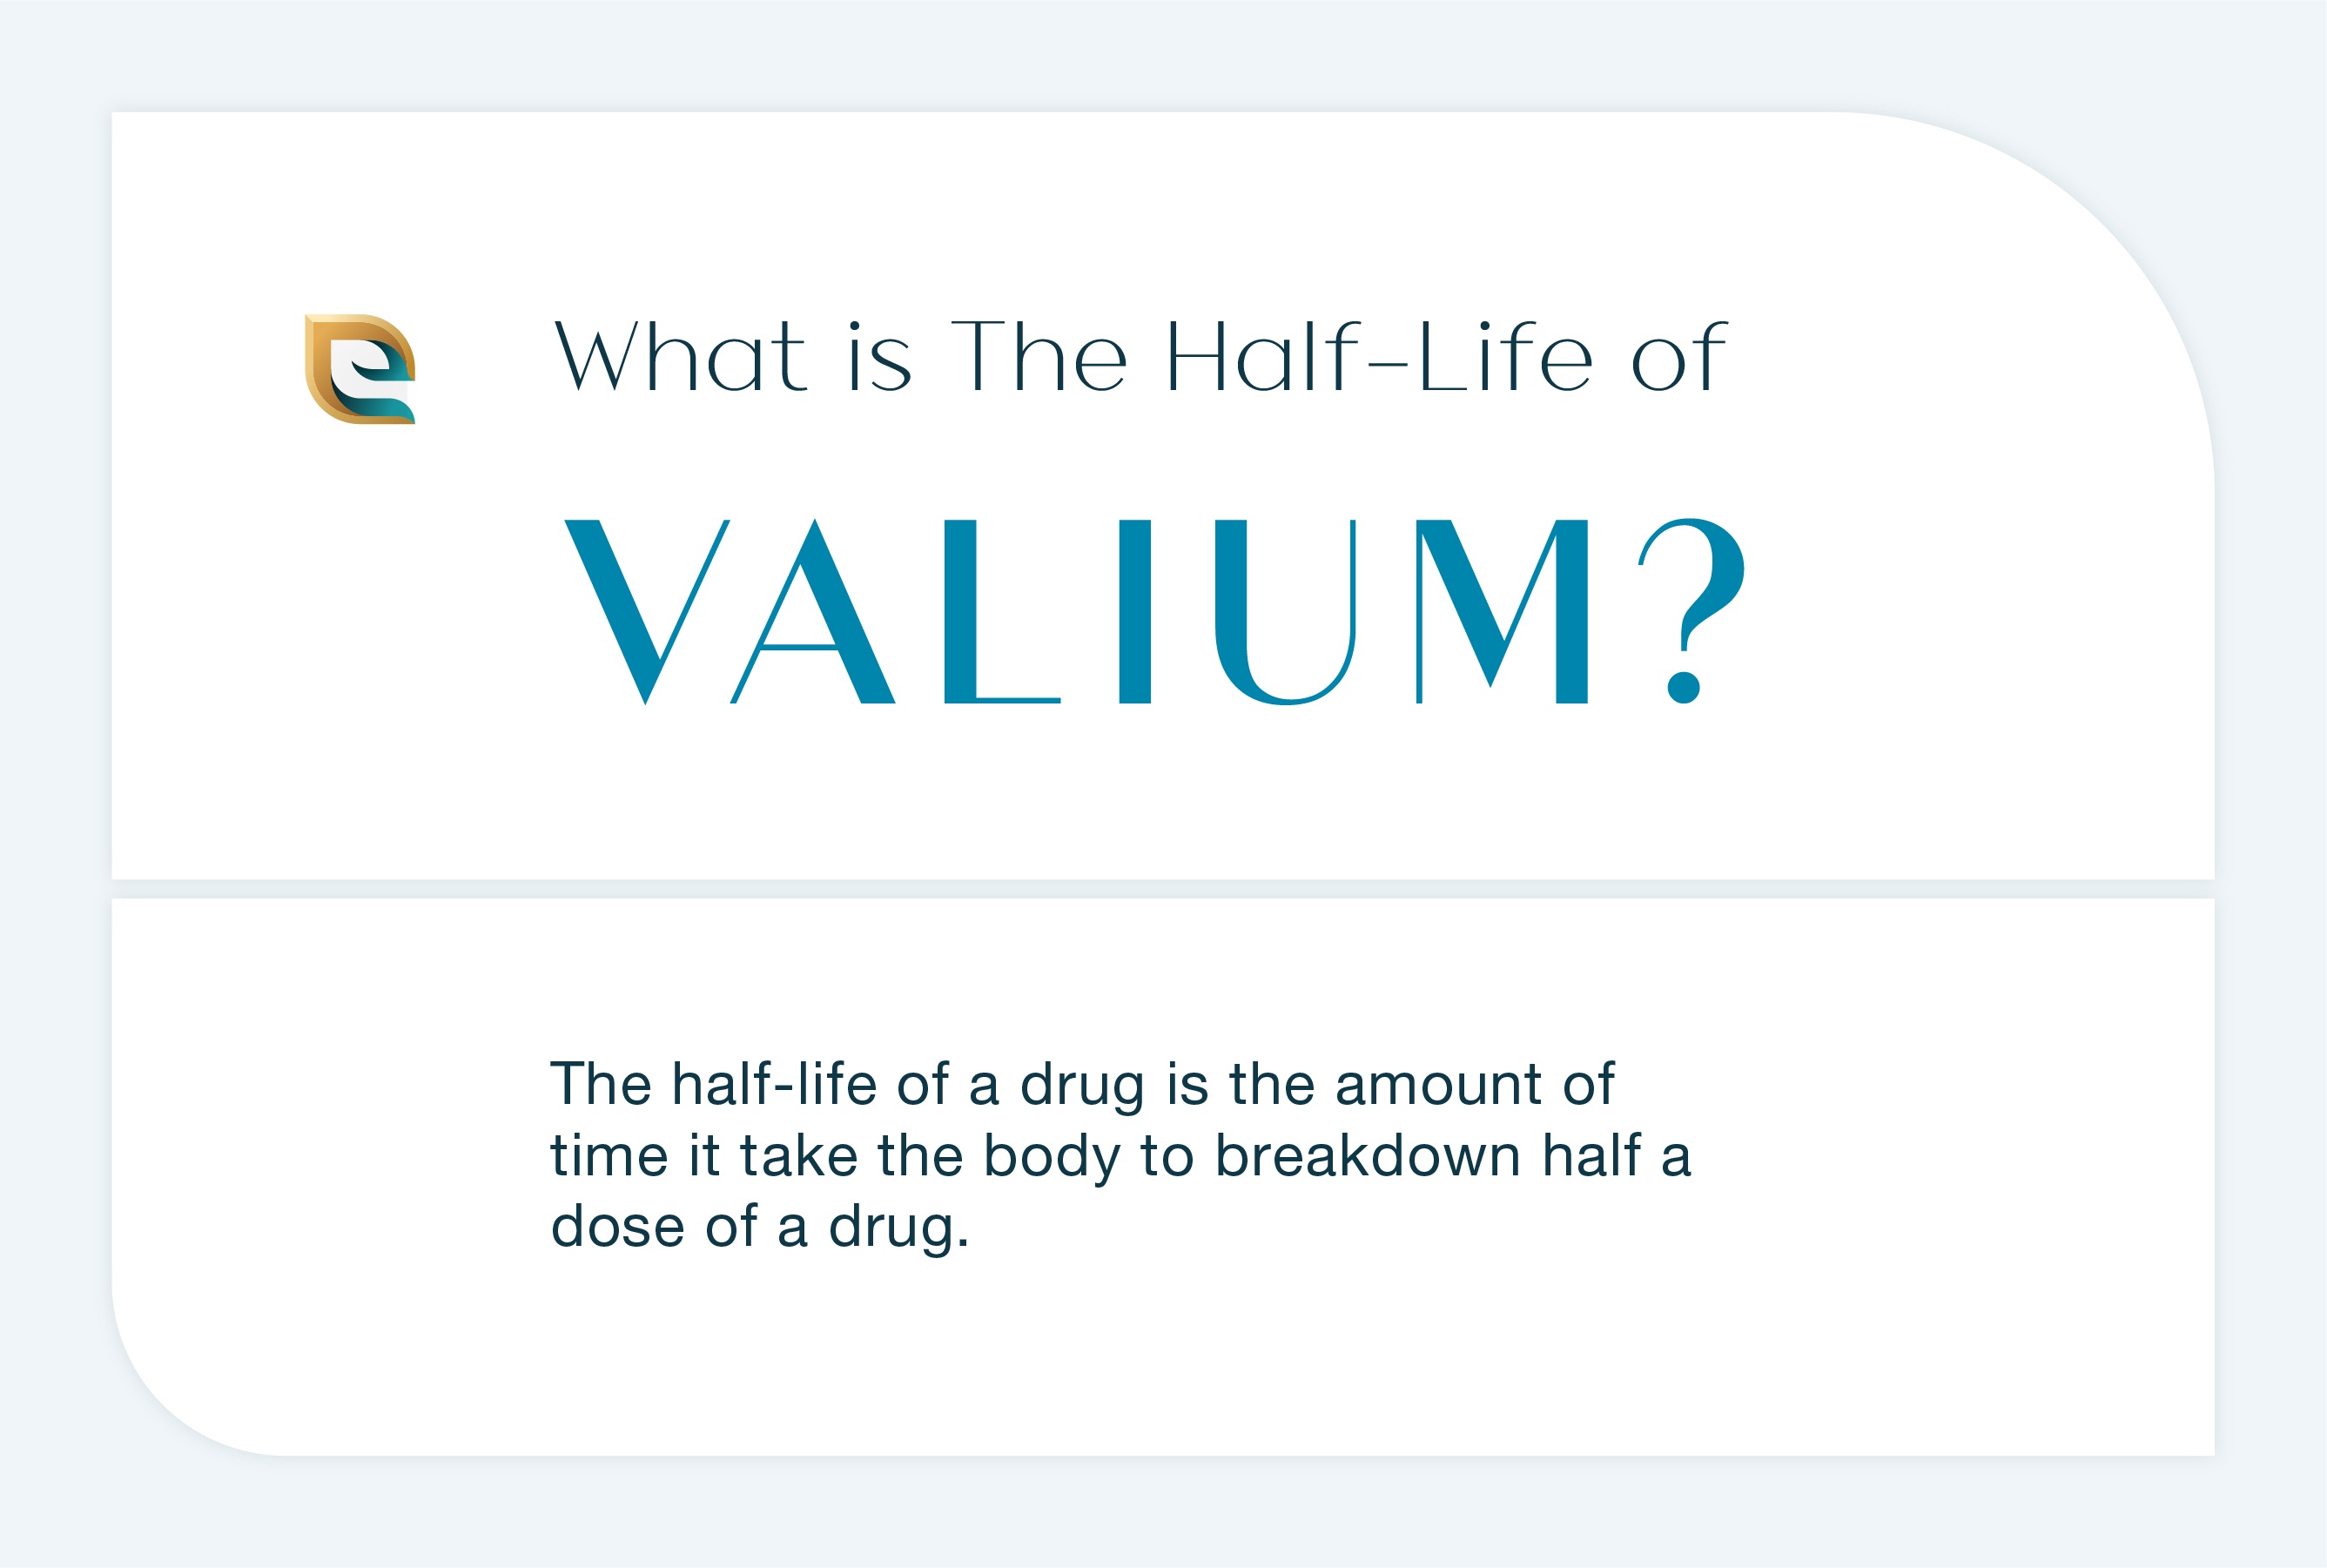 What Is The Half Life of Valium? This image describes the half life of Valium